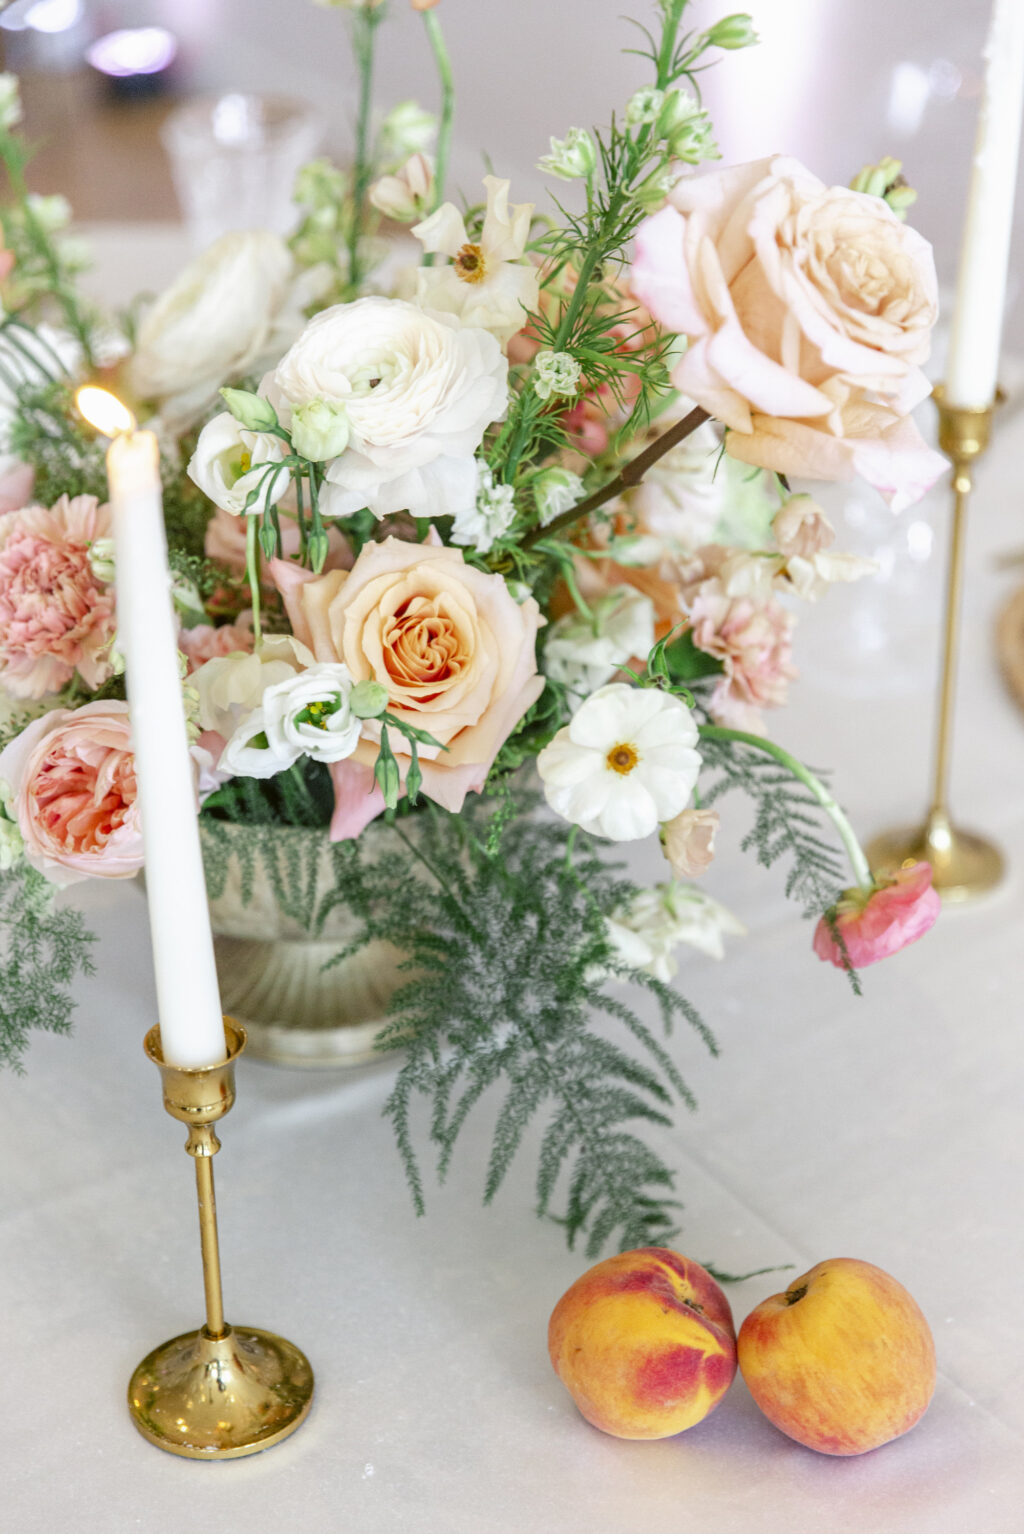 Taper Candles With Gold Candle Holders | Peach Roses, Pink Garden Roses, Carnations, and White Philadelphius, Ferns, and Stock Flowers Spring Wedding Reception Centerpiece Ideas